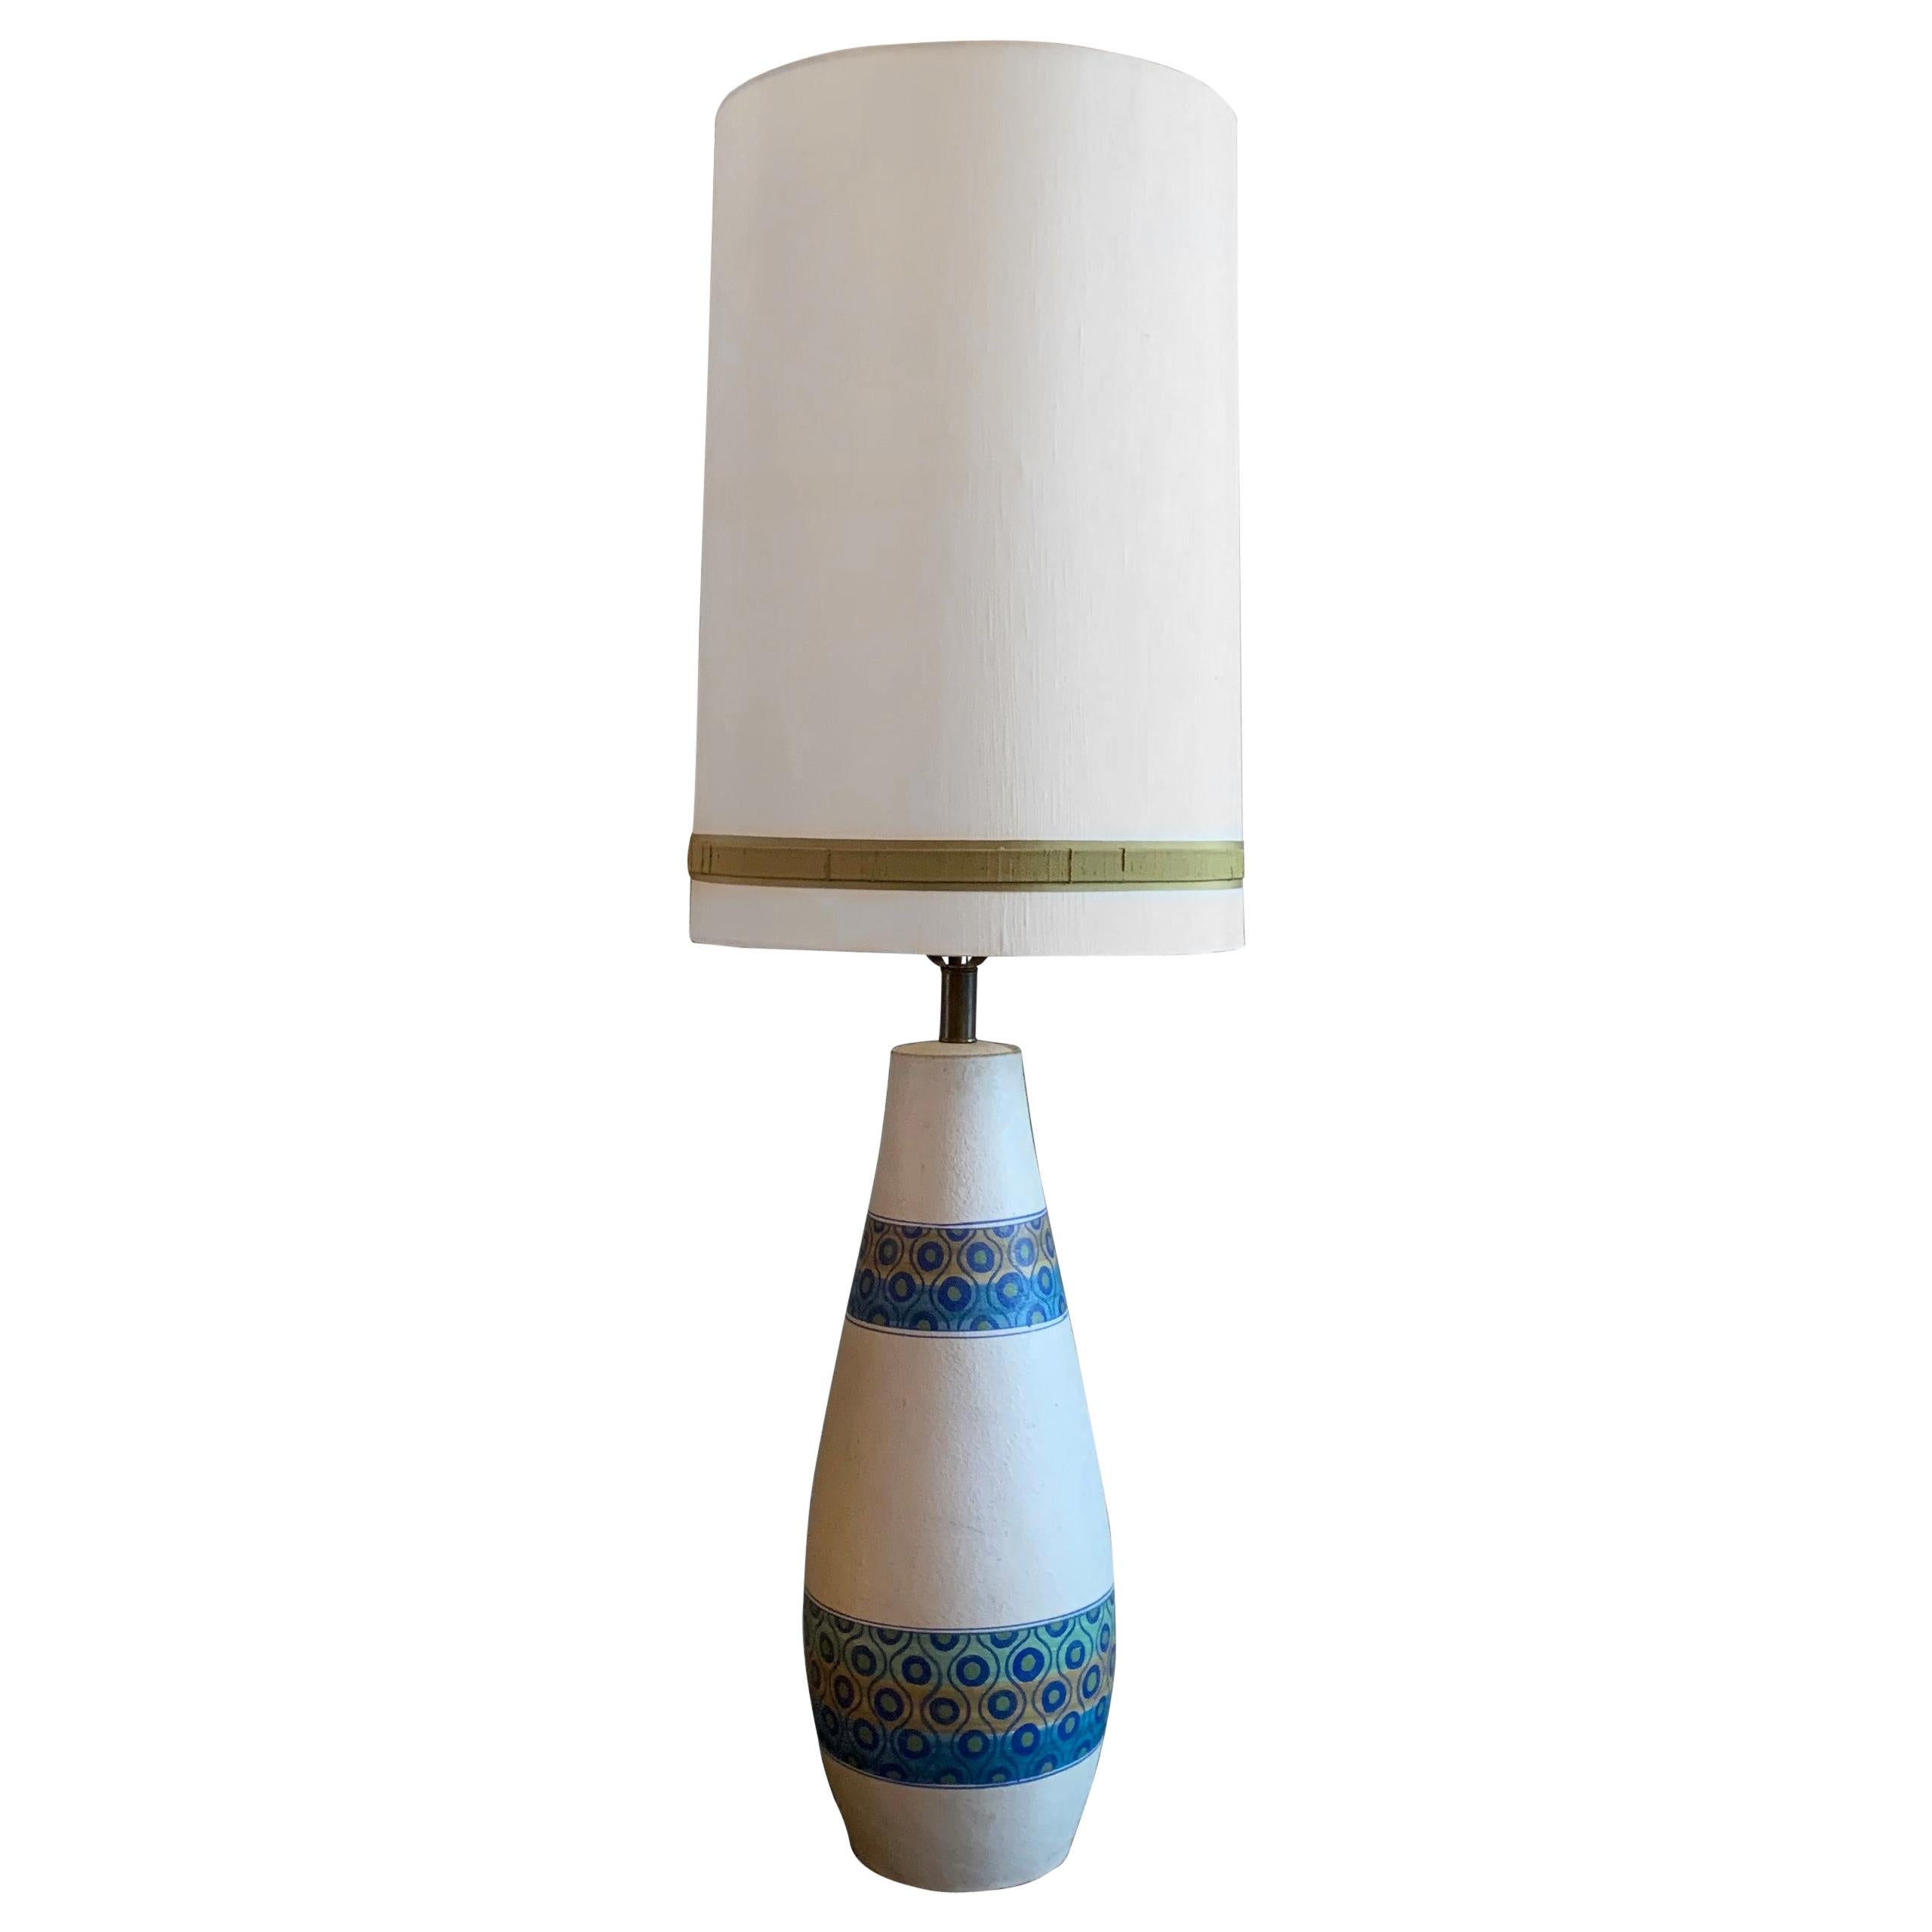 Large Mid-Century Modern Table Lamp by Aldo Londi for Bitossi For Sale